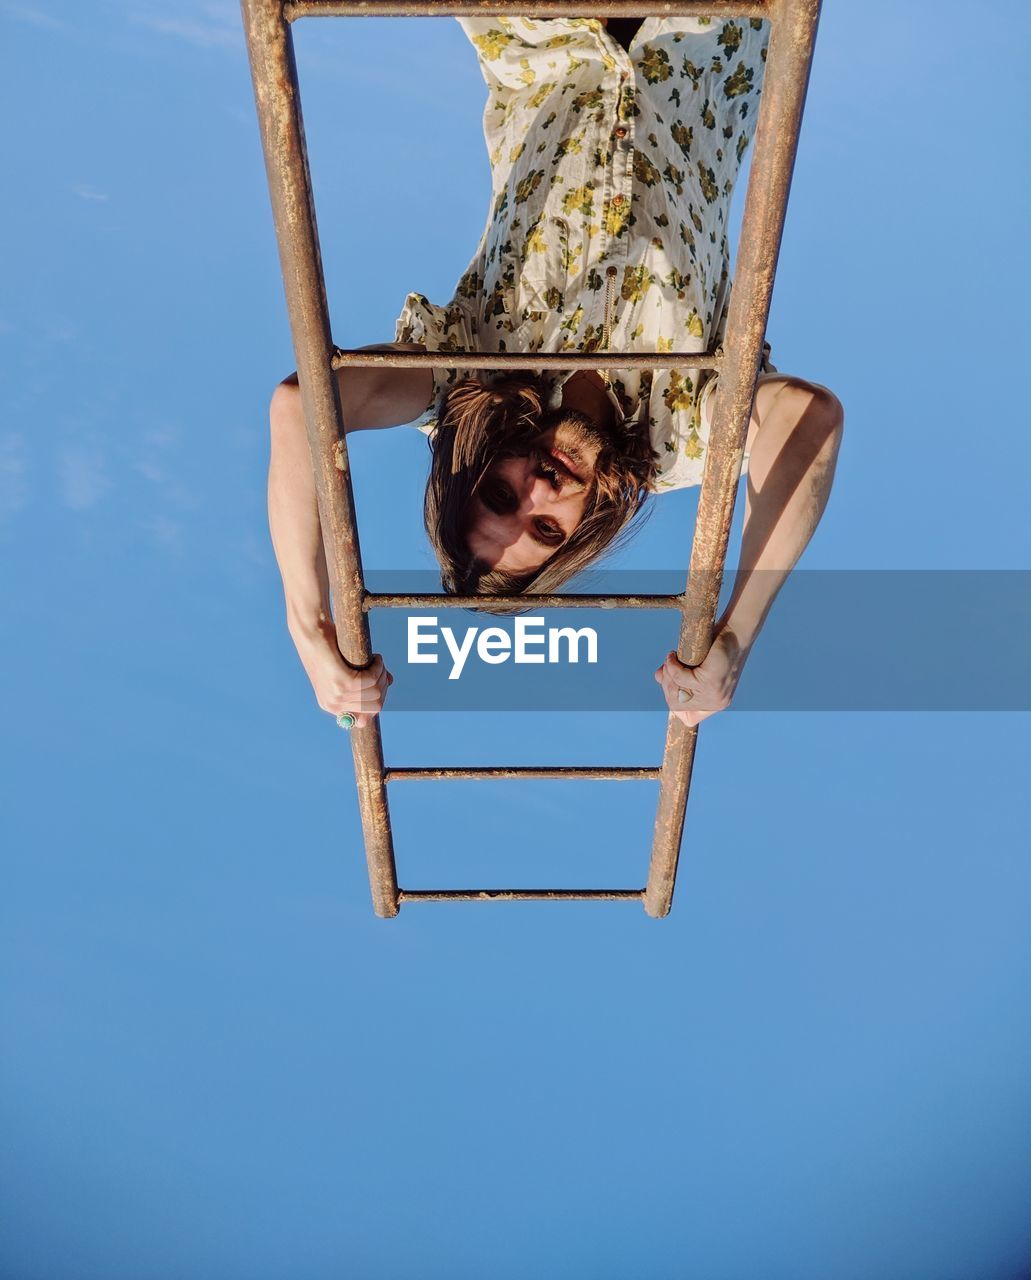 Low angle portrait of young man climbing on ladder against clear blue sky